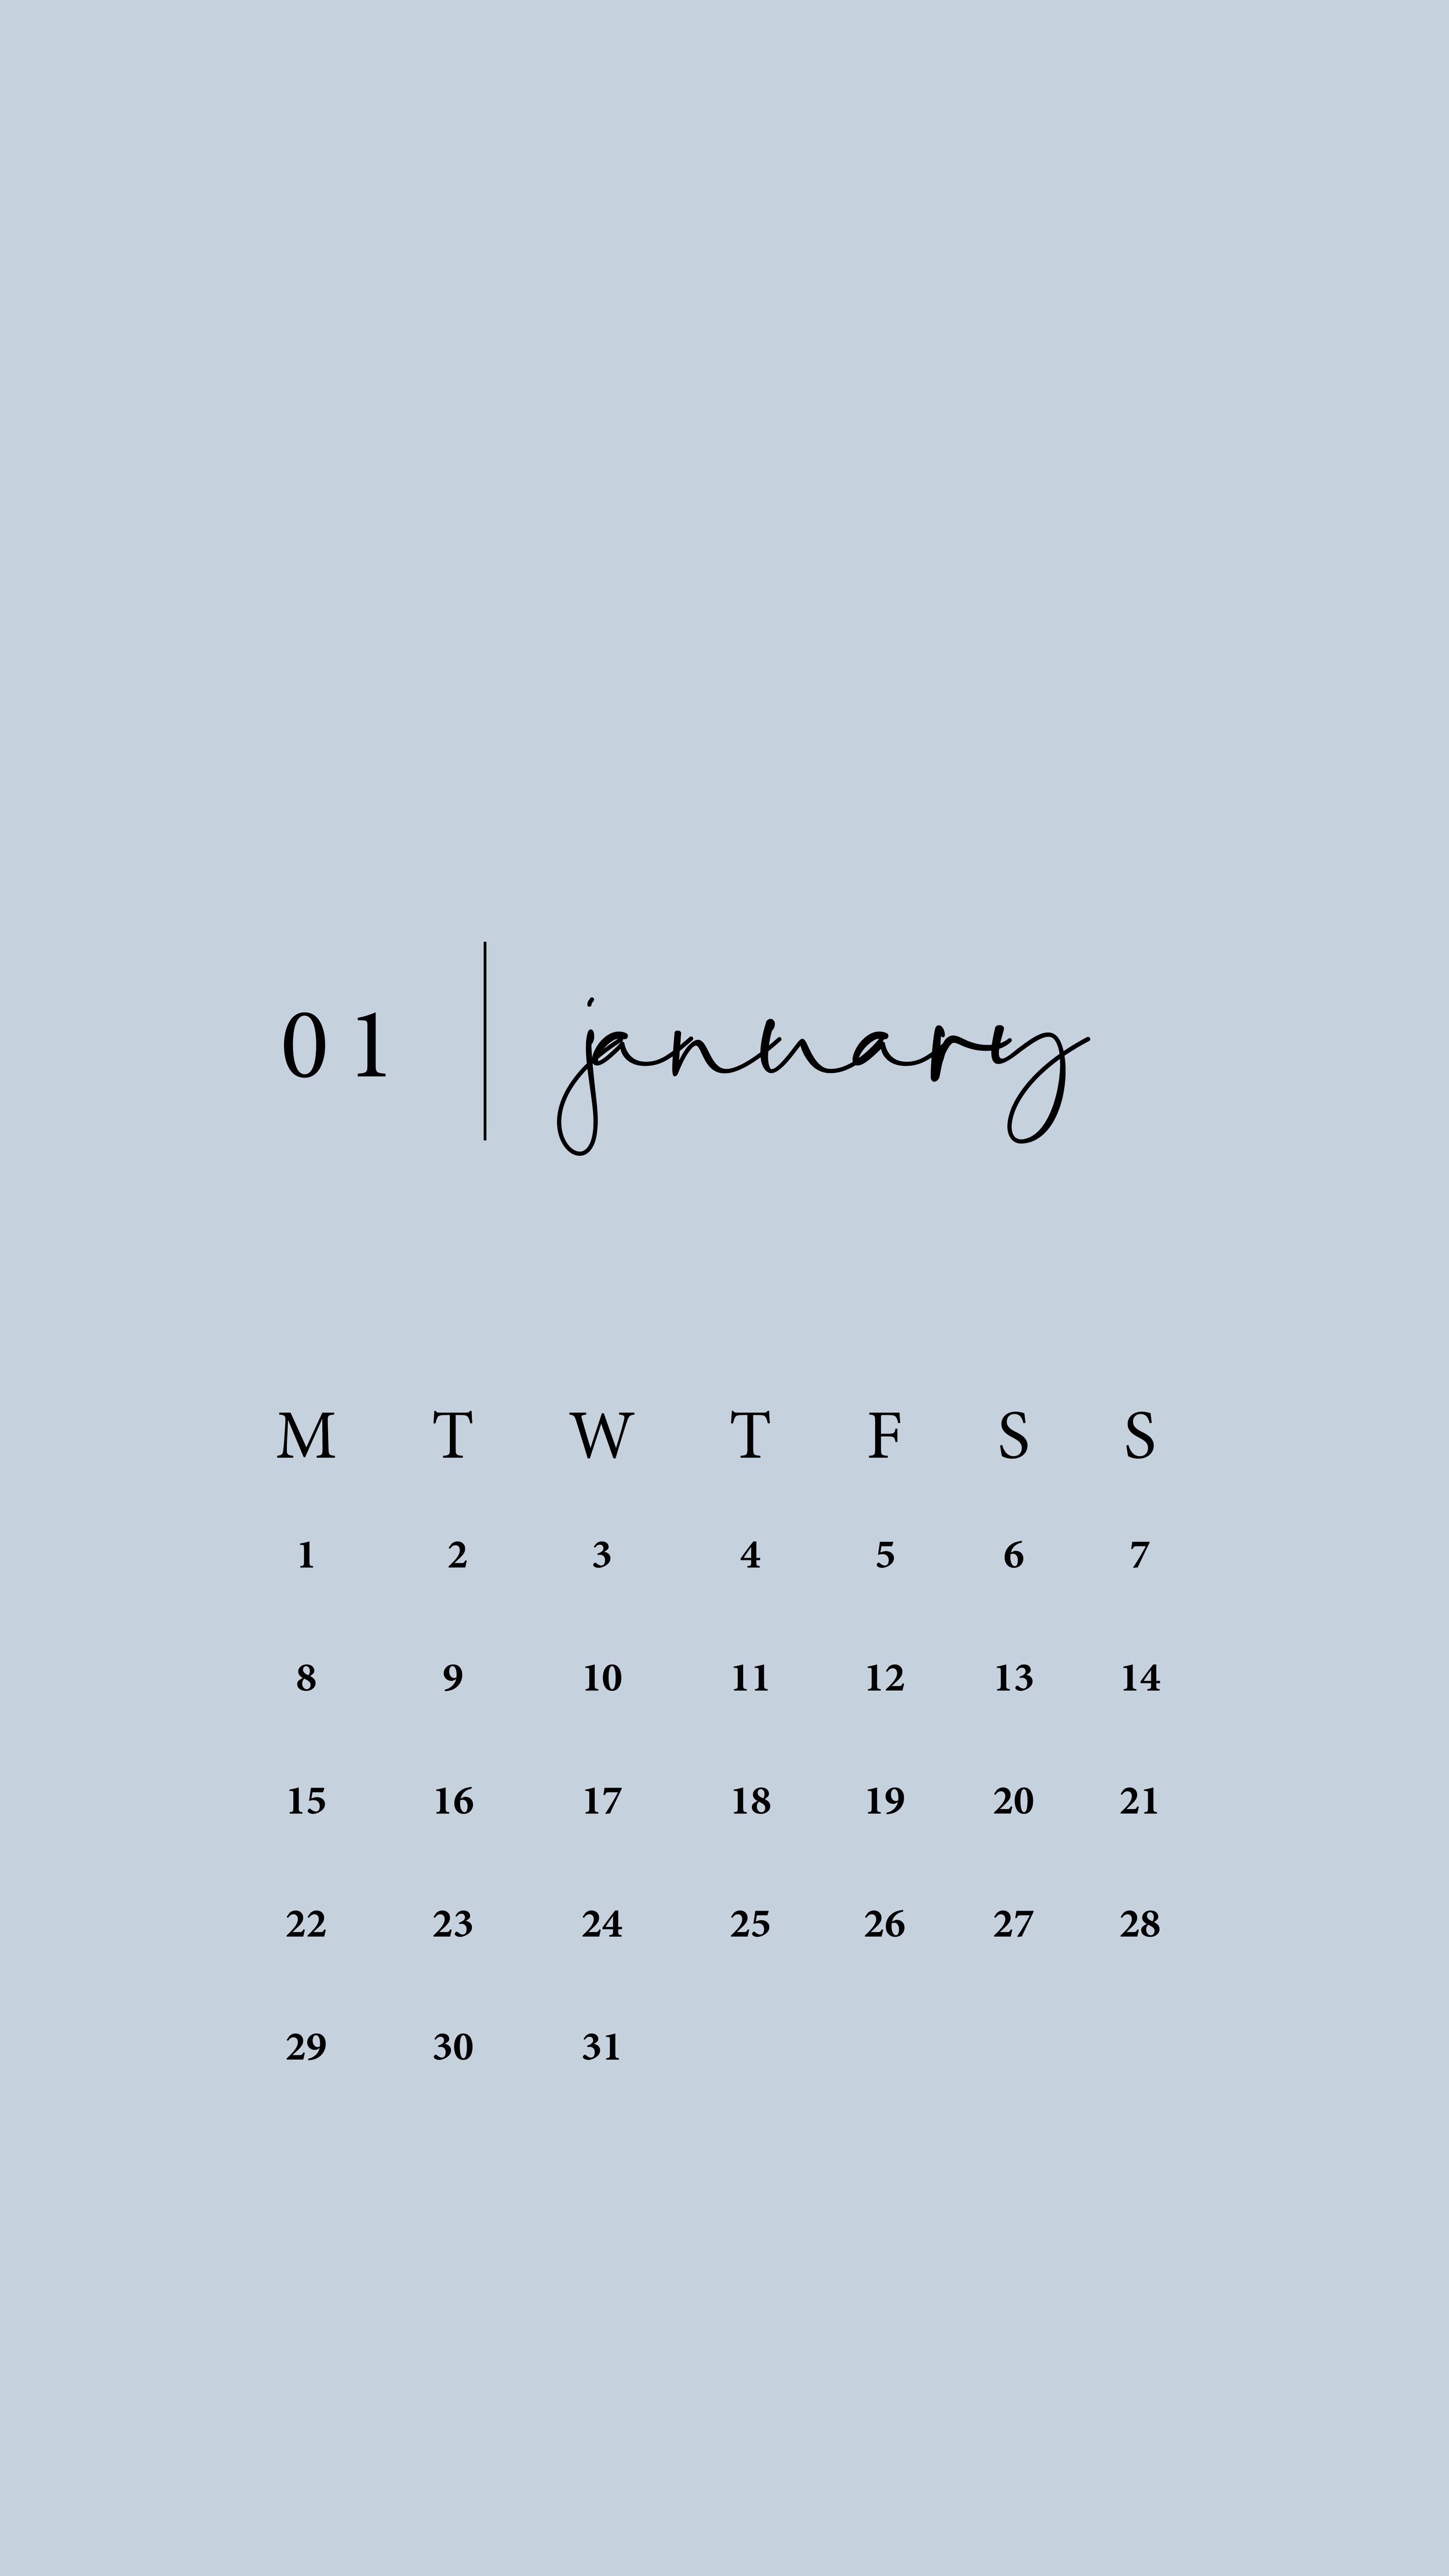 Calendars, Greeting Cards, Wallpapers